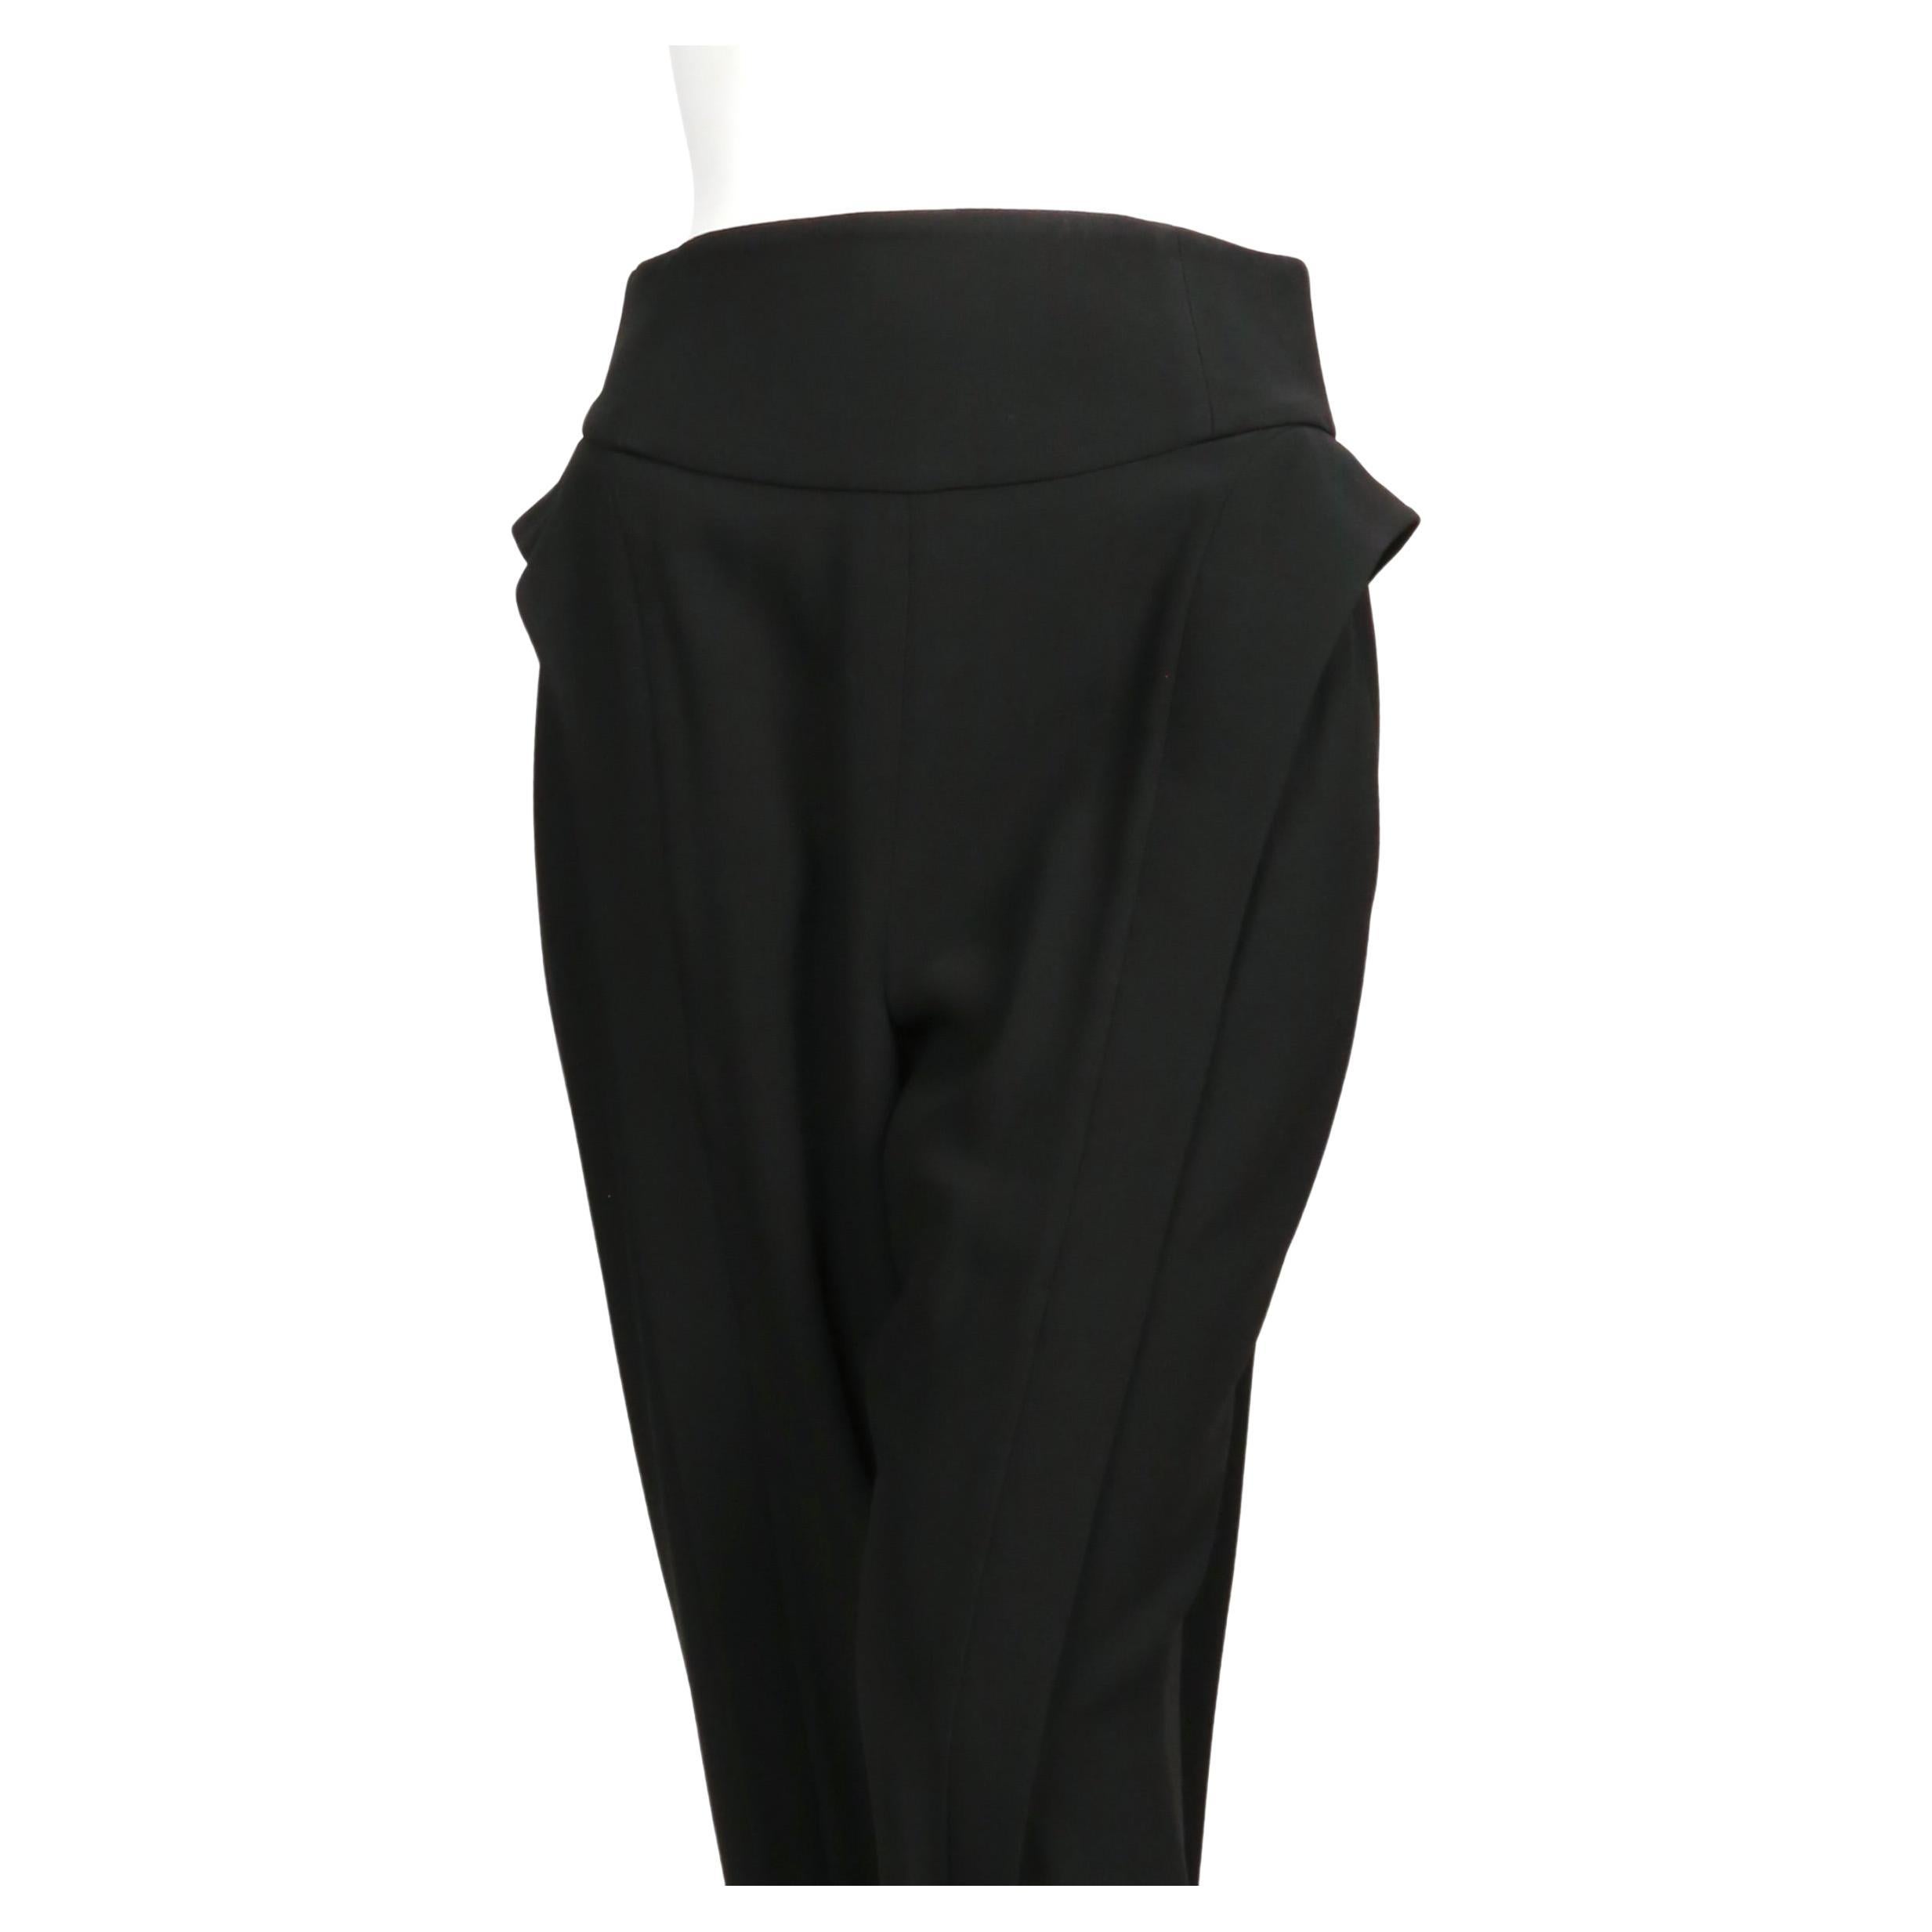 2000's ALEXANDER MCQUEEN black pants with side ruffles In Good Condition For Sale In San Fransisco, CA